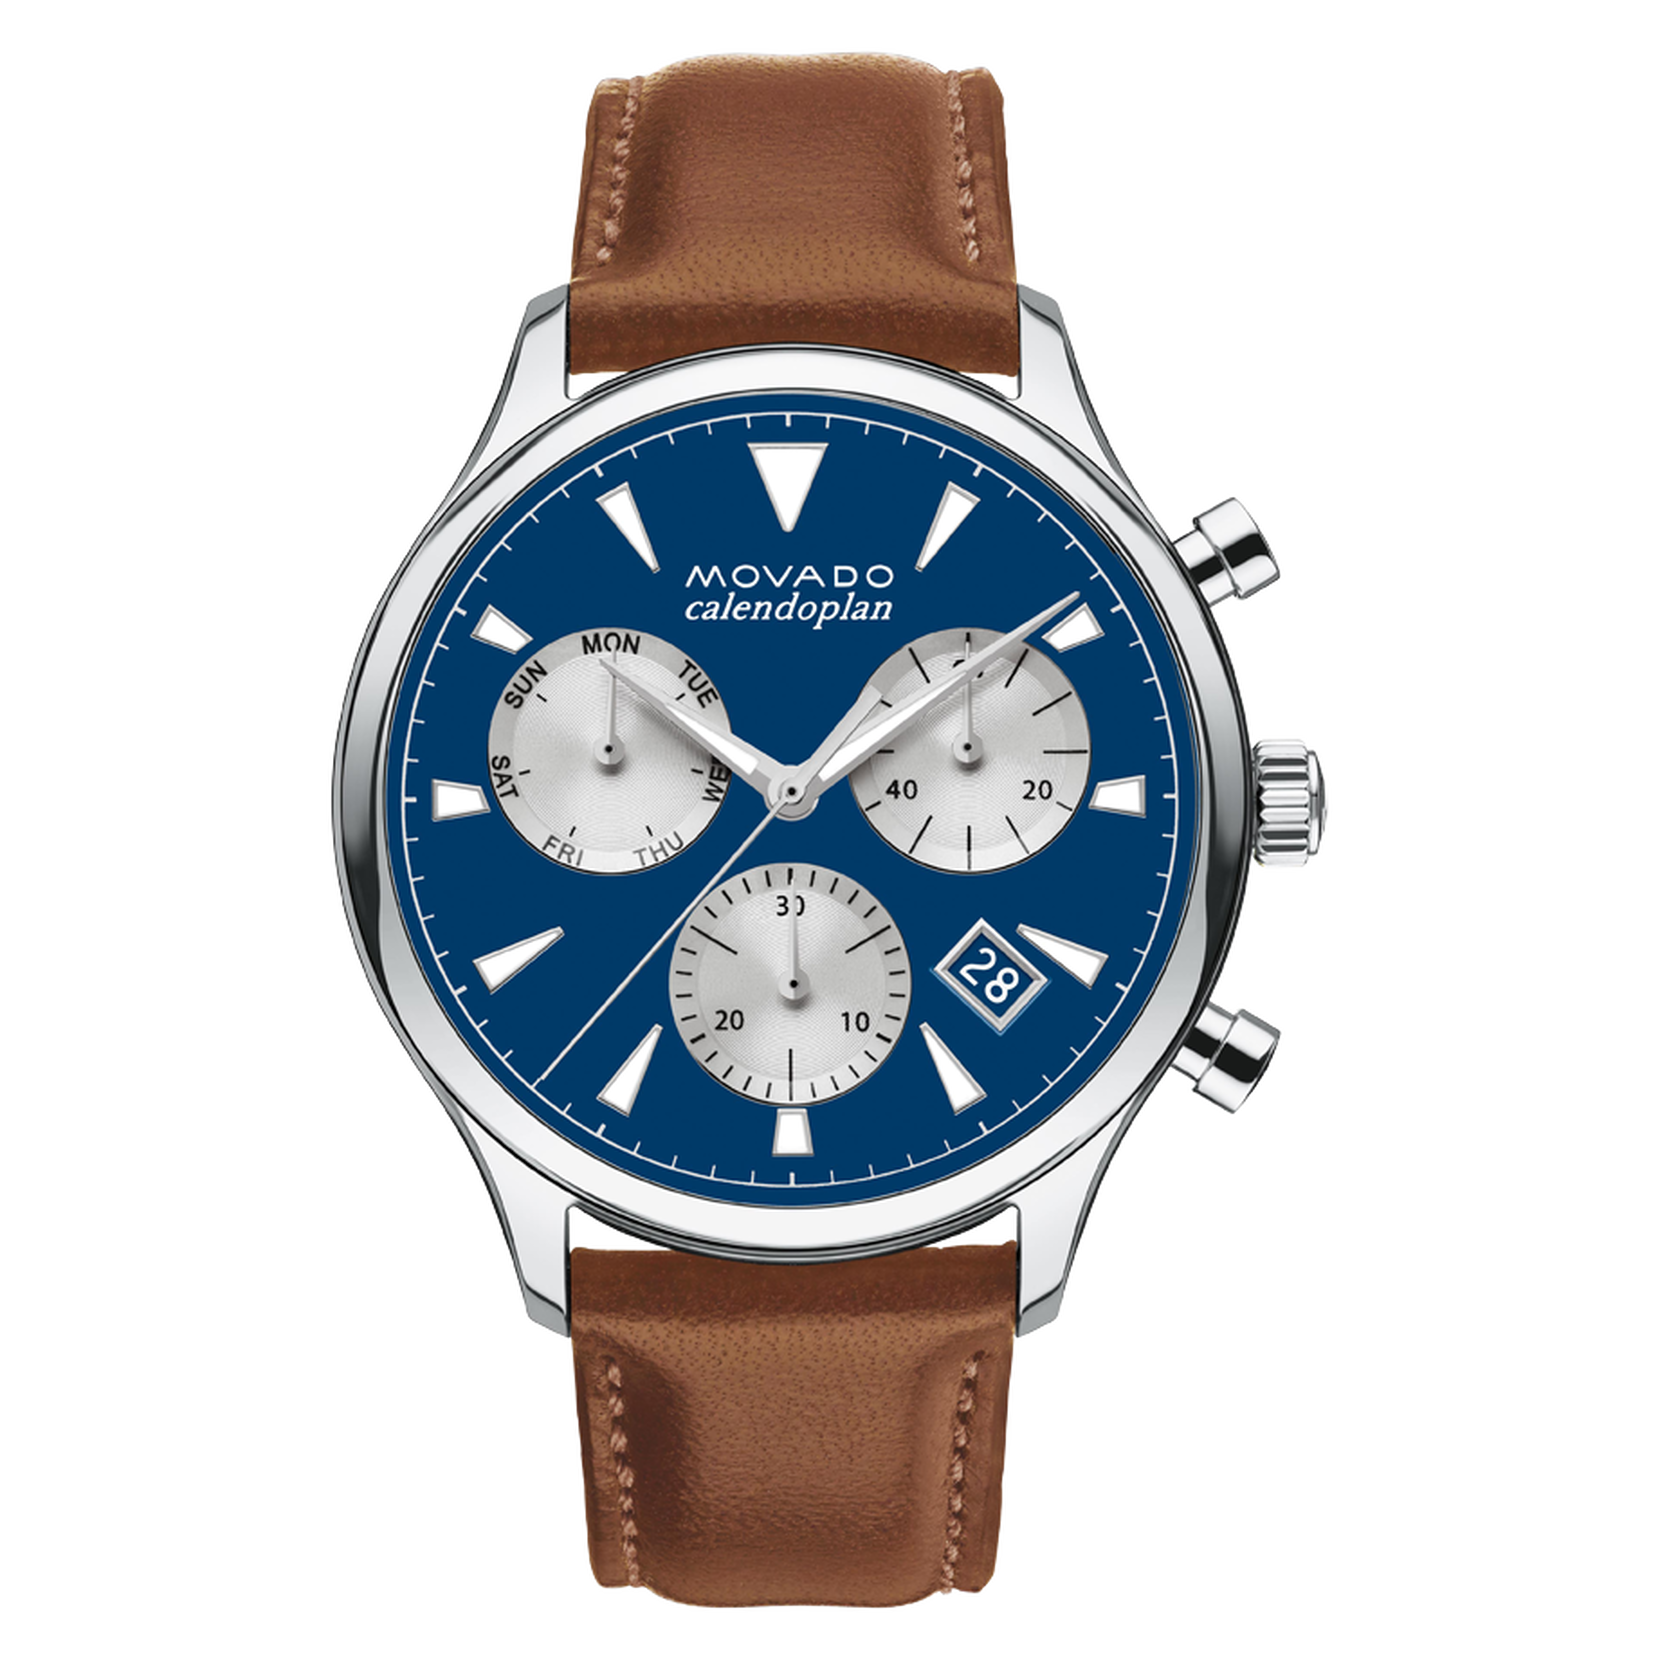 Movado Heritage Series Chronograph Blue Dial Watch w/ a Brown Leather Strap